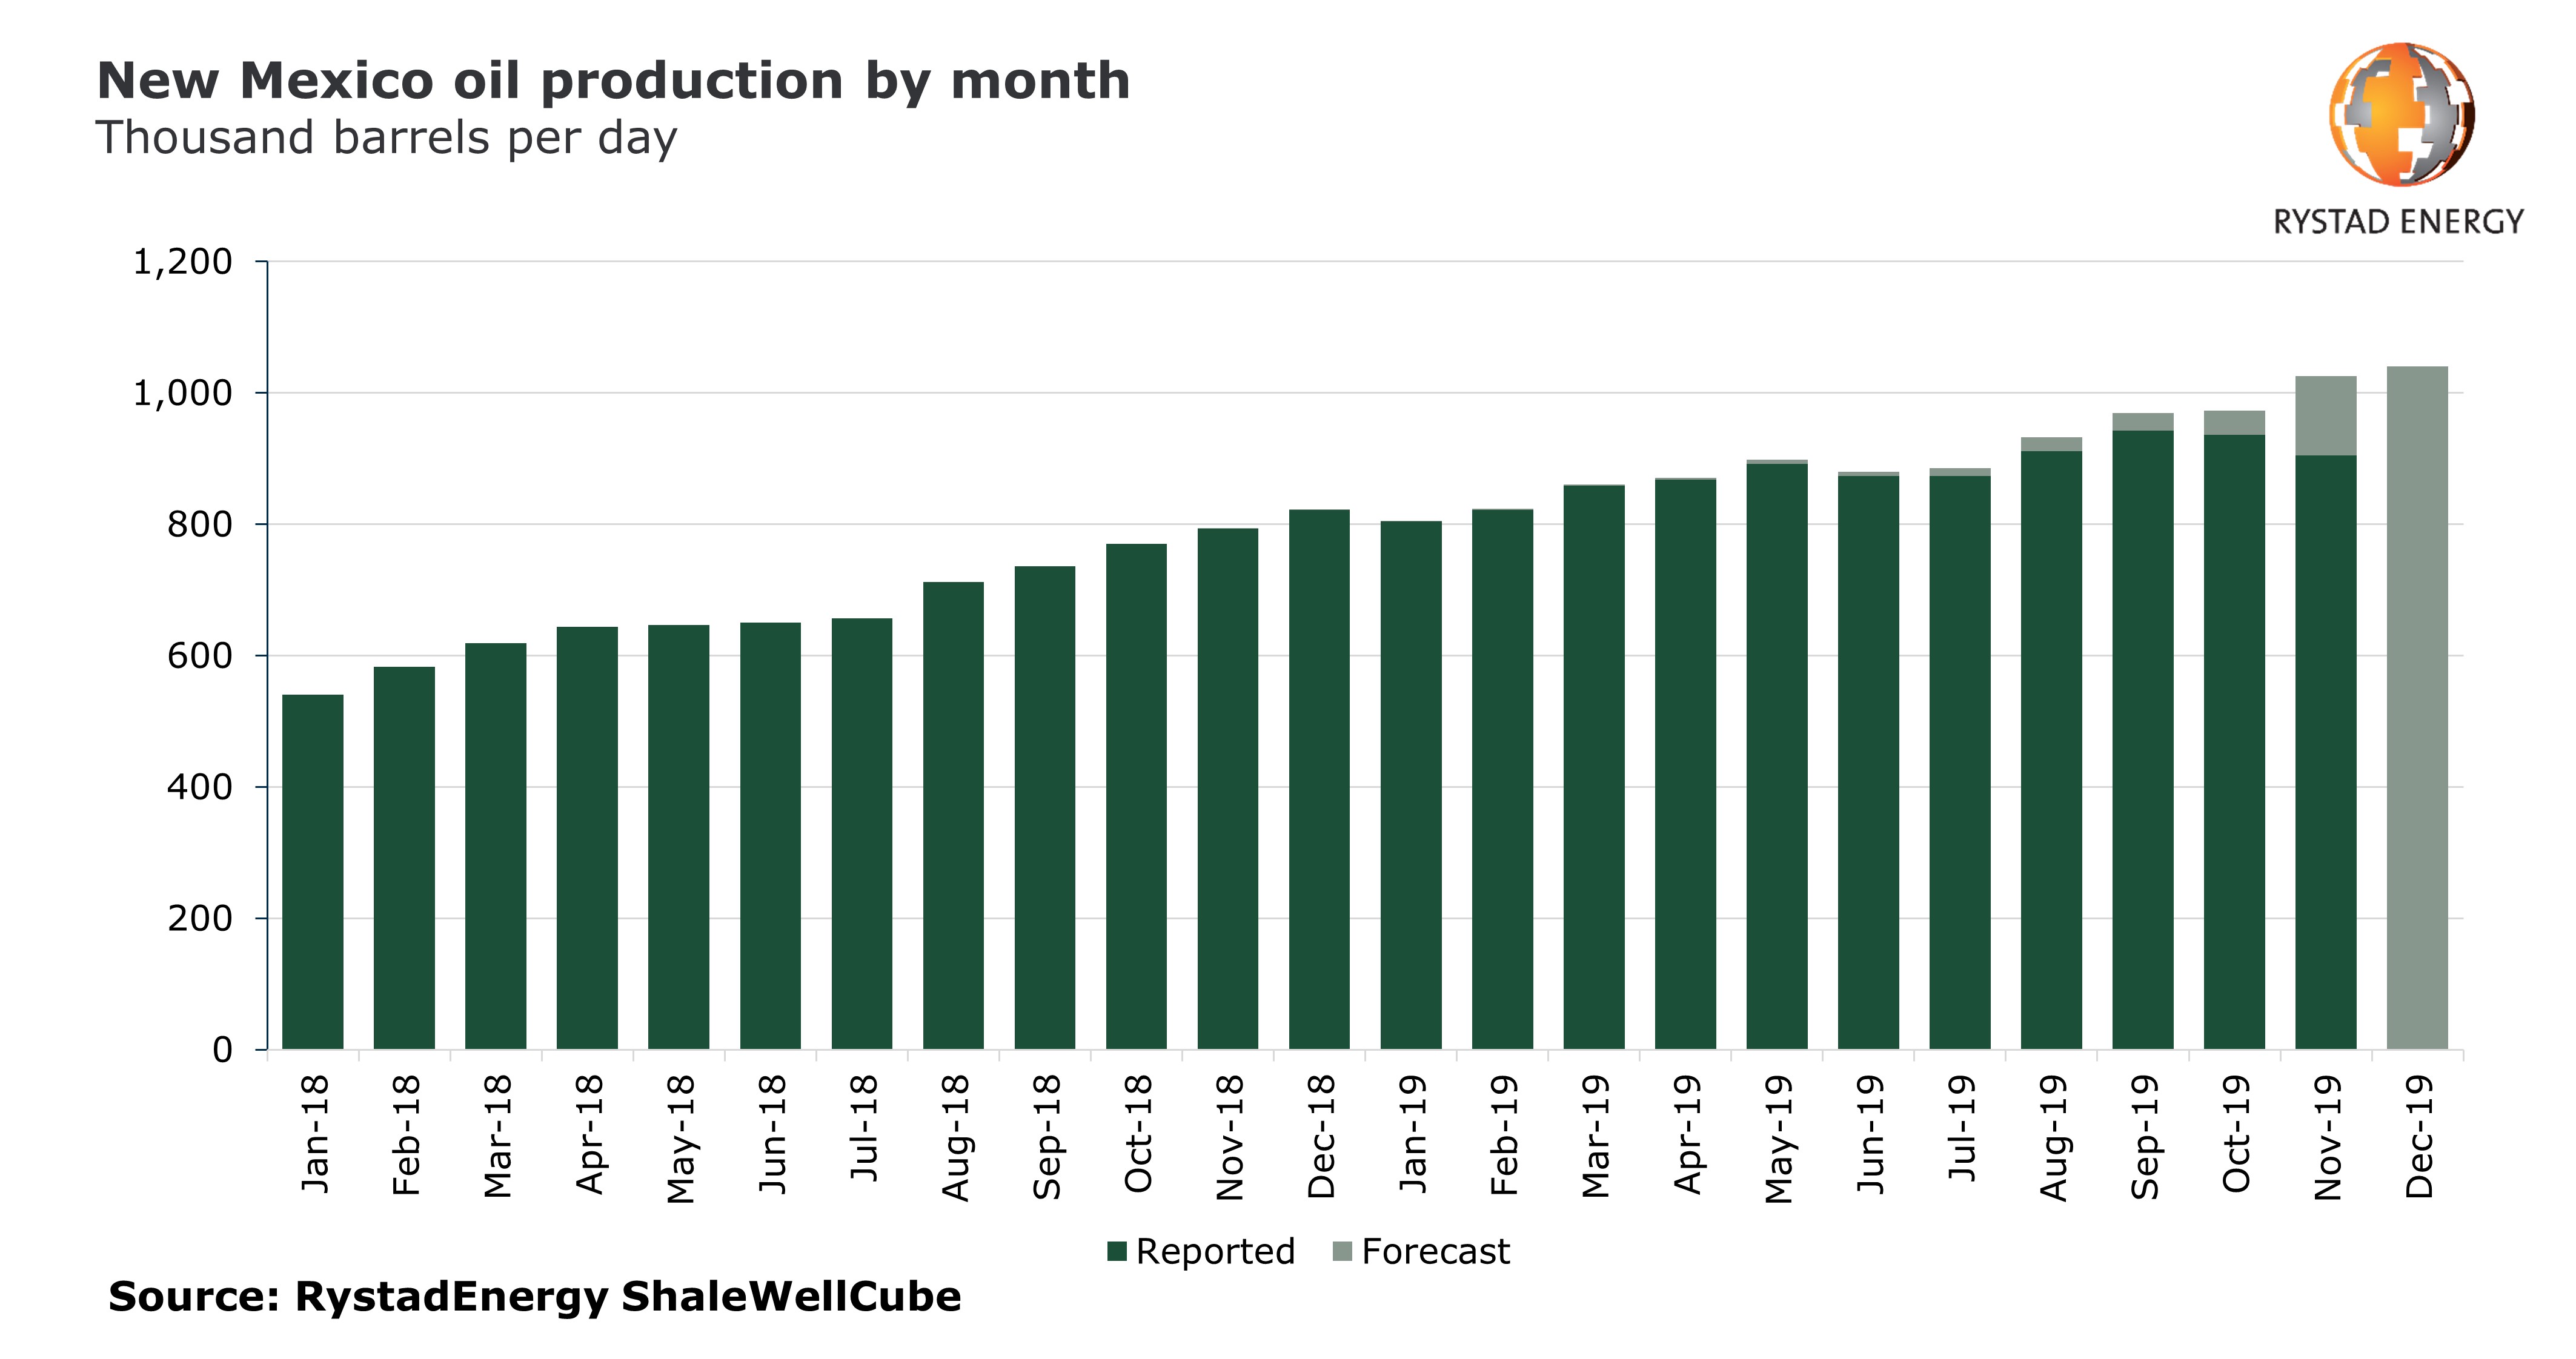 Oil production in New Mexico by month in thousand barrels per day